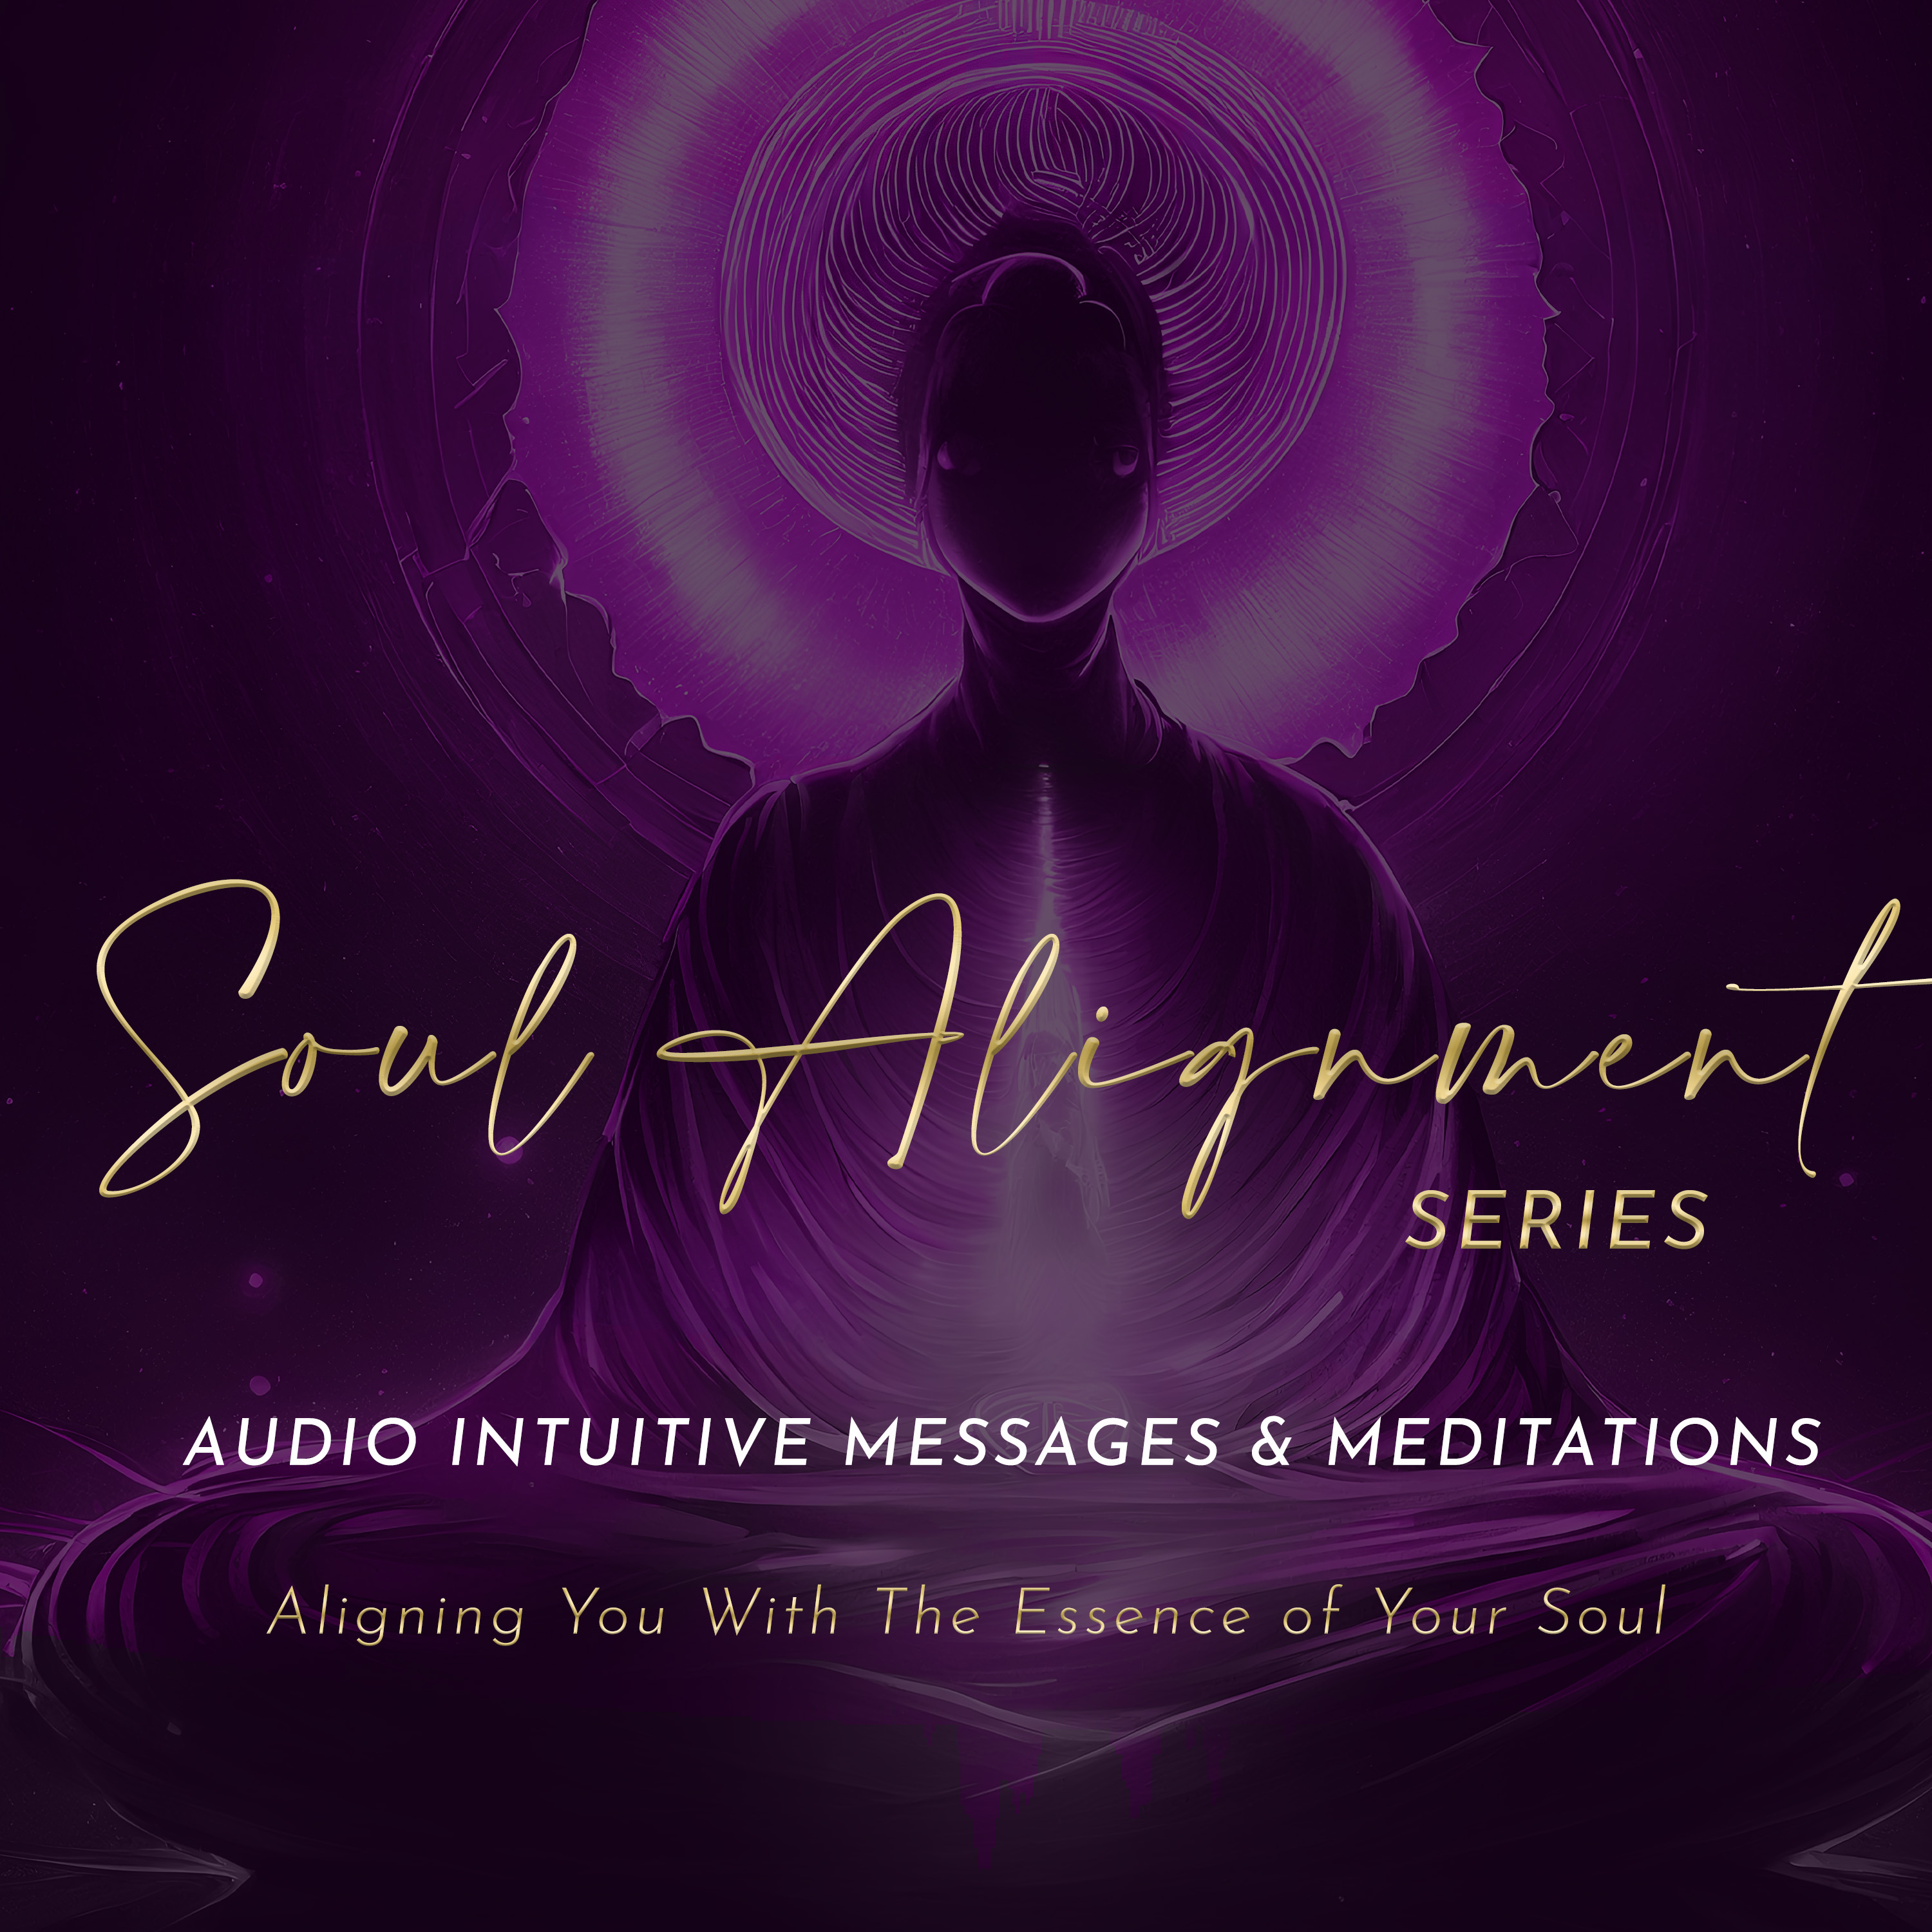 Introduction to Soul Alignment Series